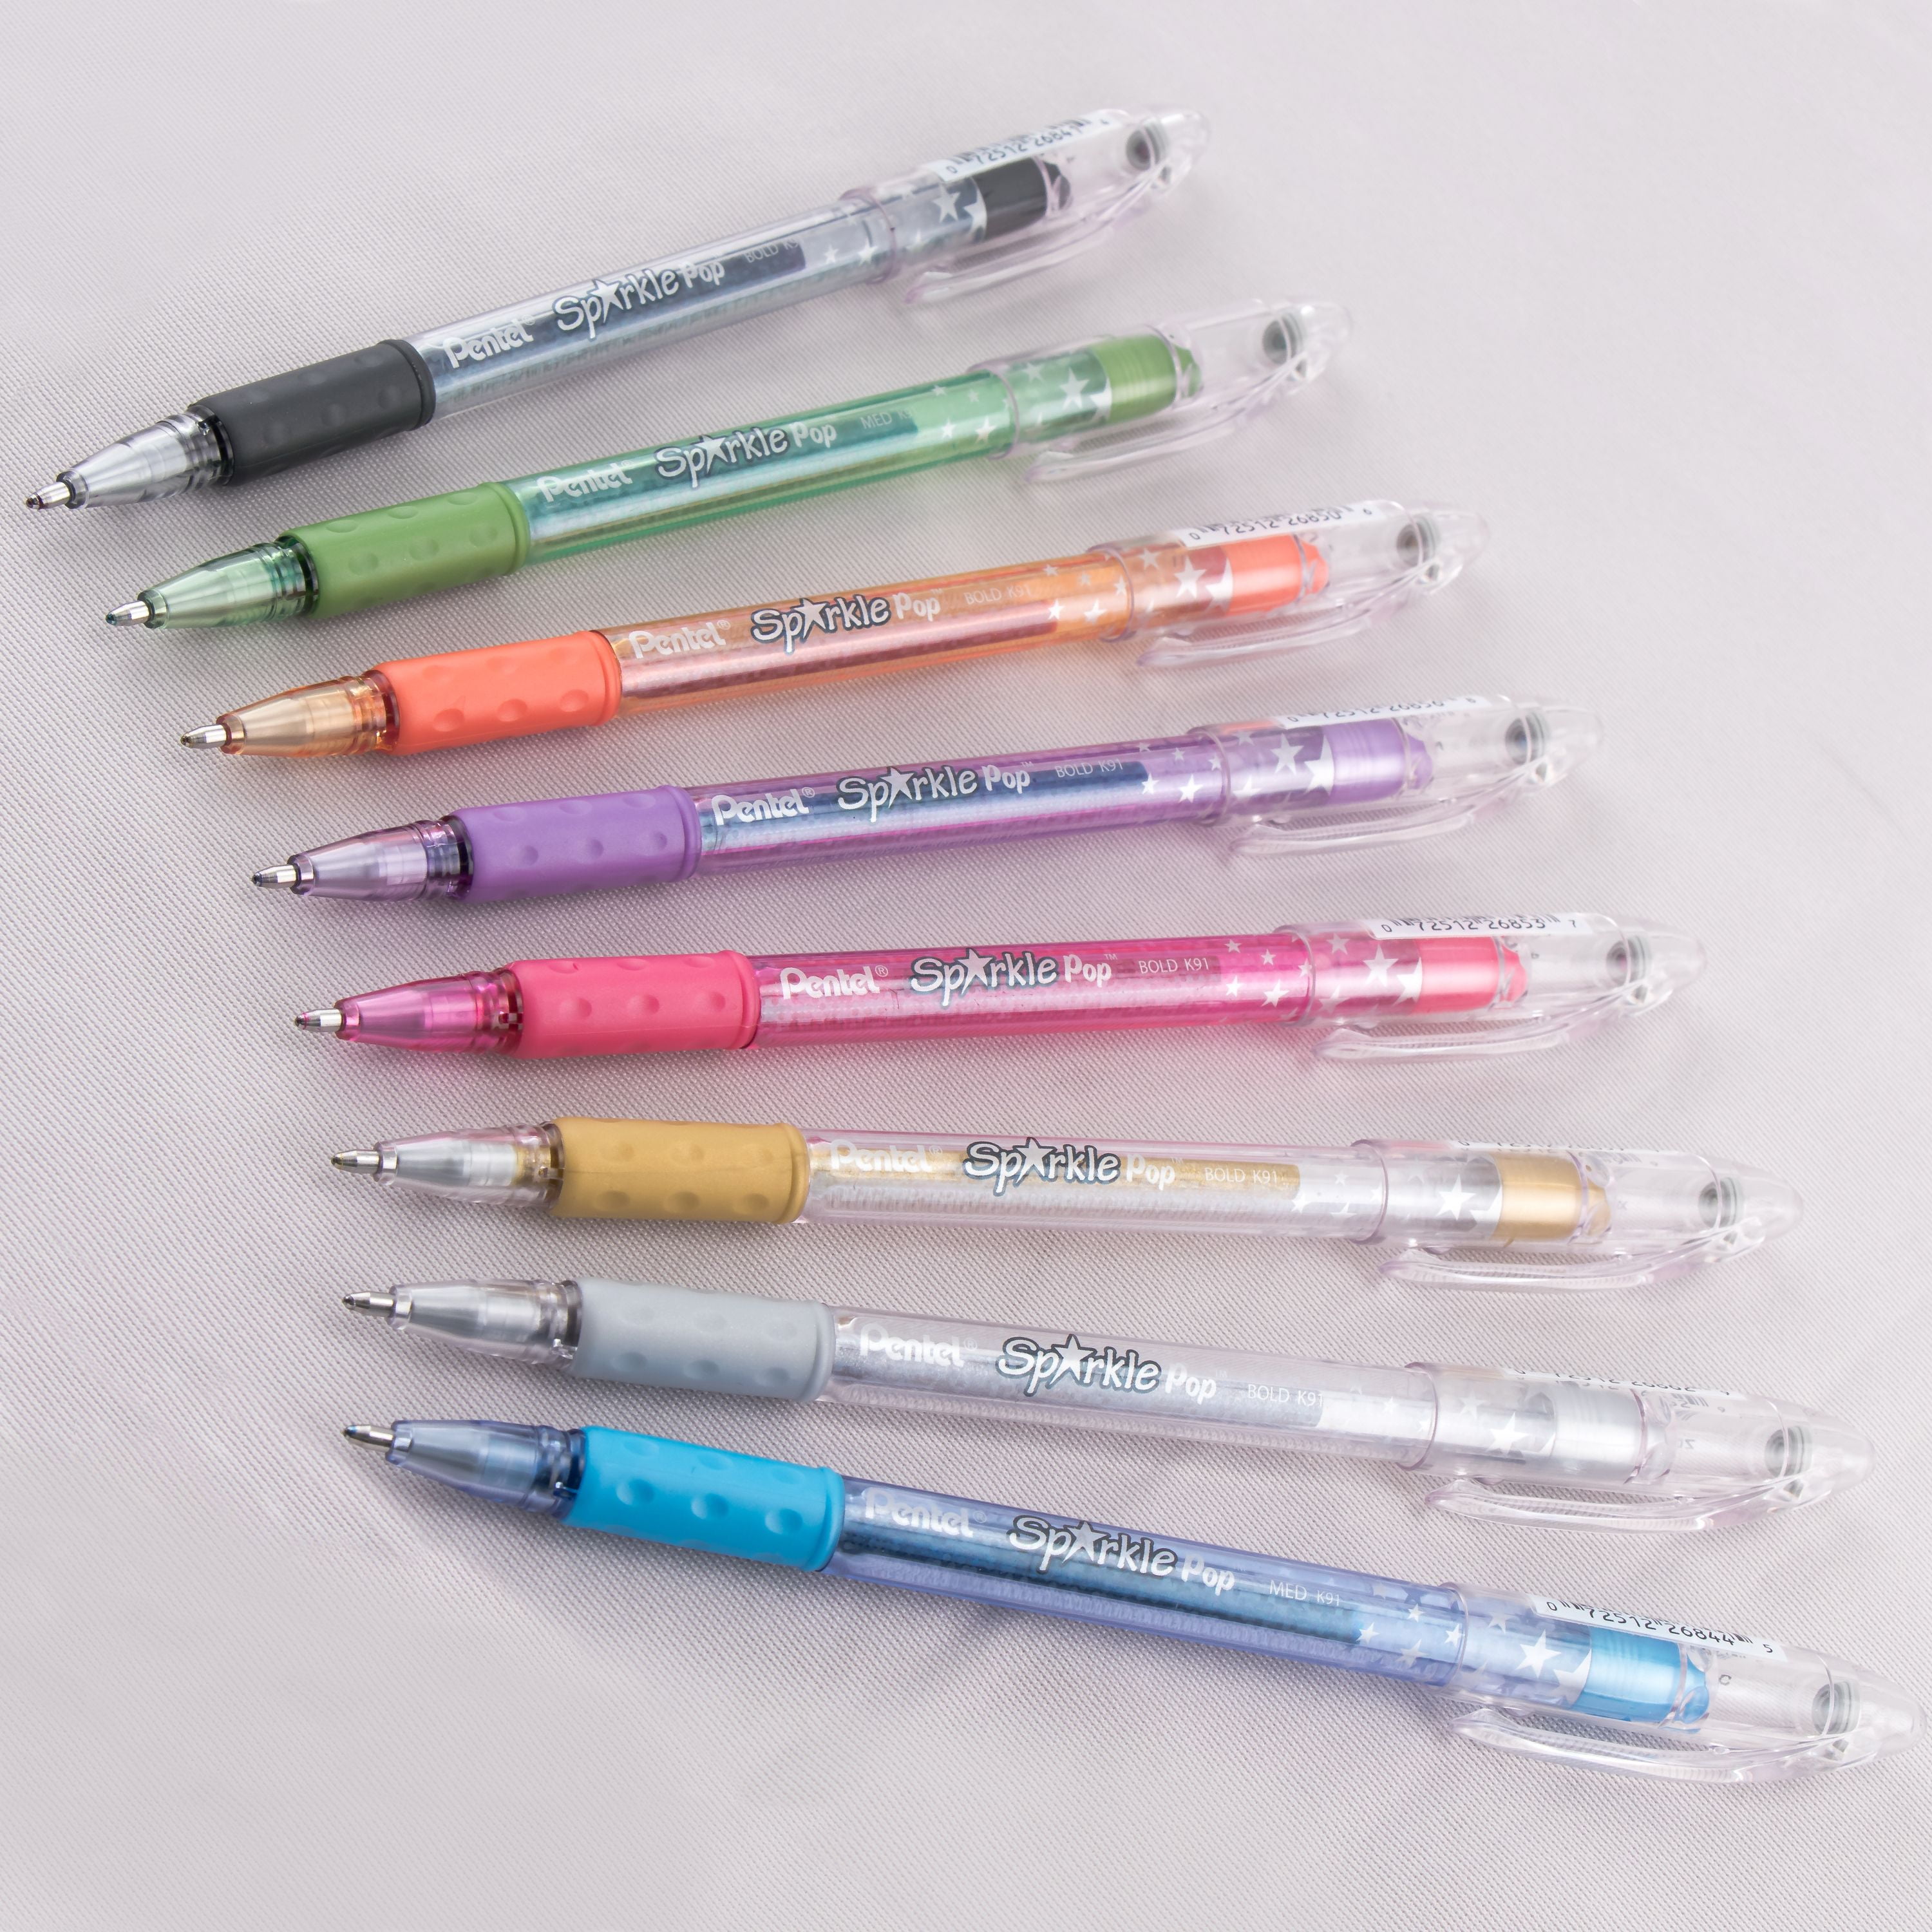 Artist & Craftsman Supply Southeast Portland - ✨Staff Pick✨ These Sparkle  Pop Gel Pens by Pentel never fail to amaze! We carry a variety of colors,  but our favorites are the Green/Blue